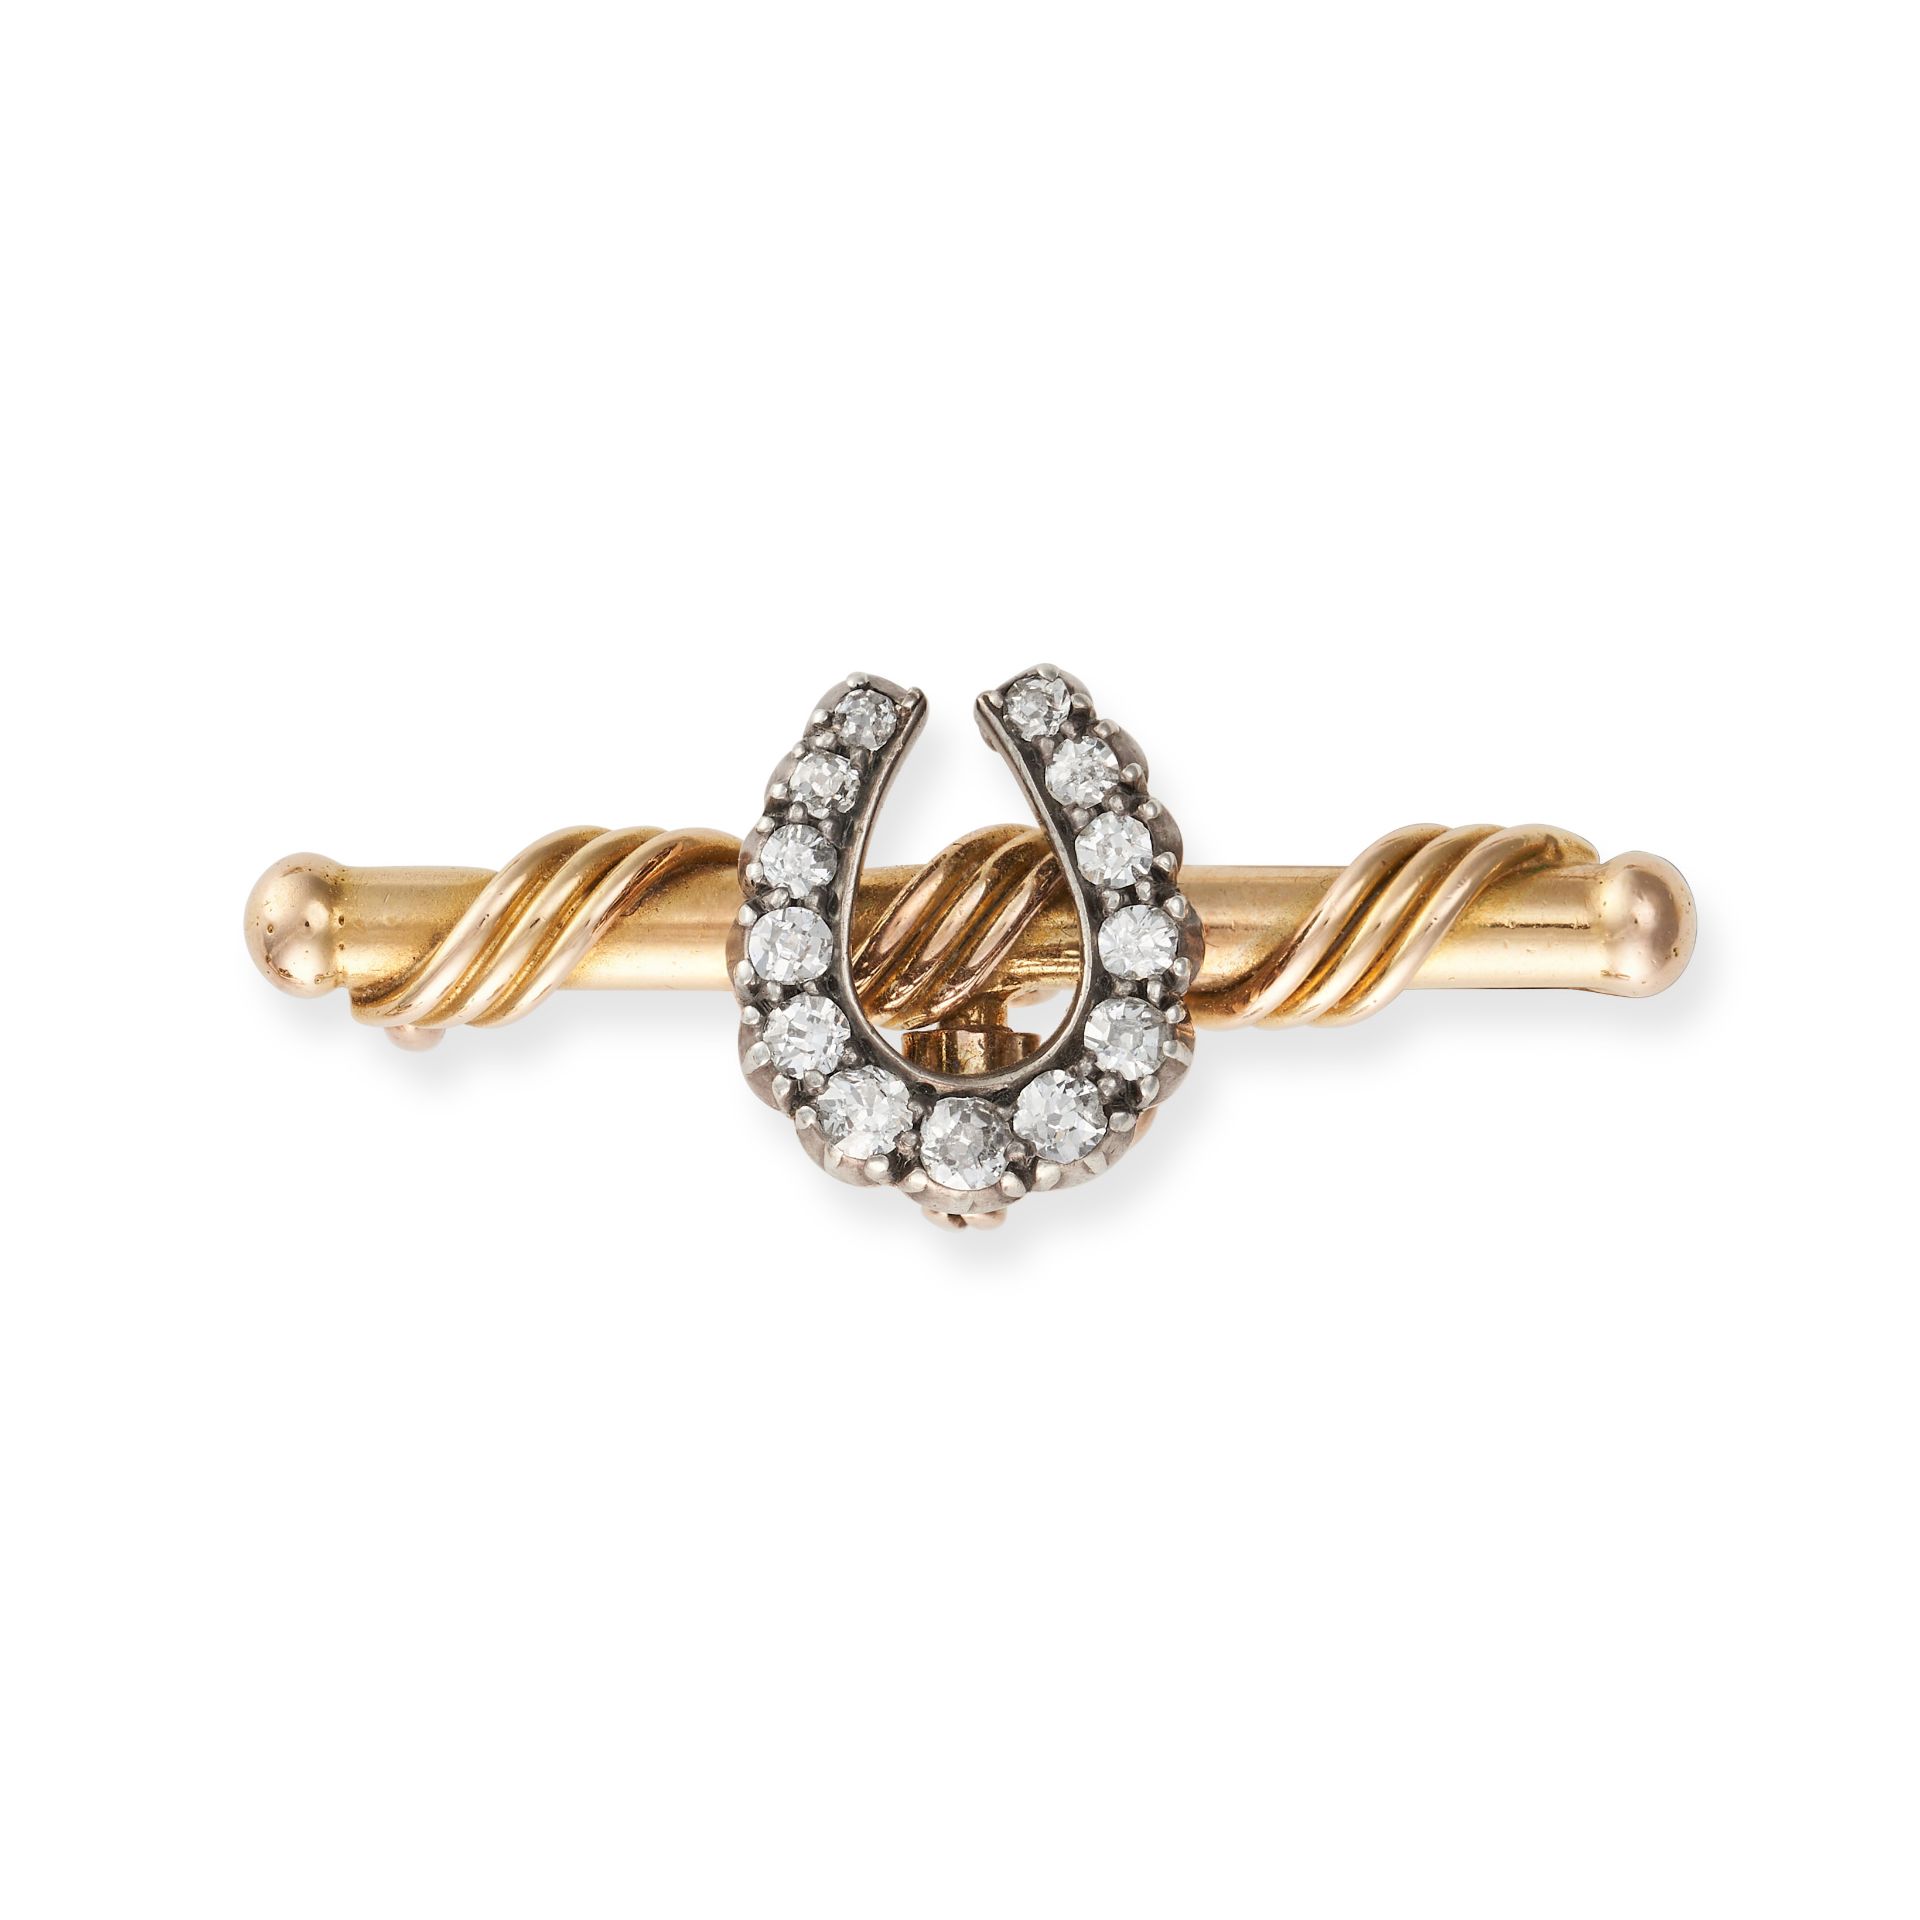 AN ANTIQUE DIAMOND HORSESHOE BAR BROOCH designed as a horseshoe set with old cut diamonds, on a t...